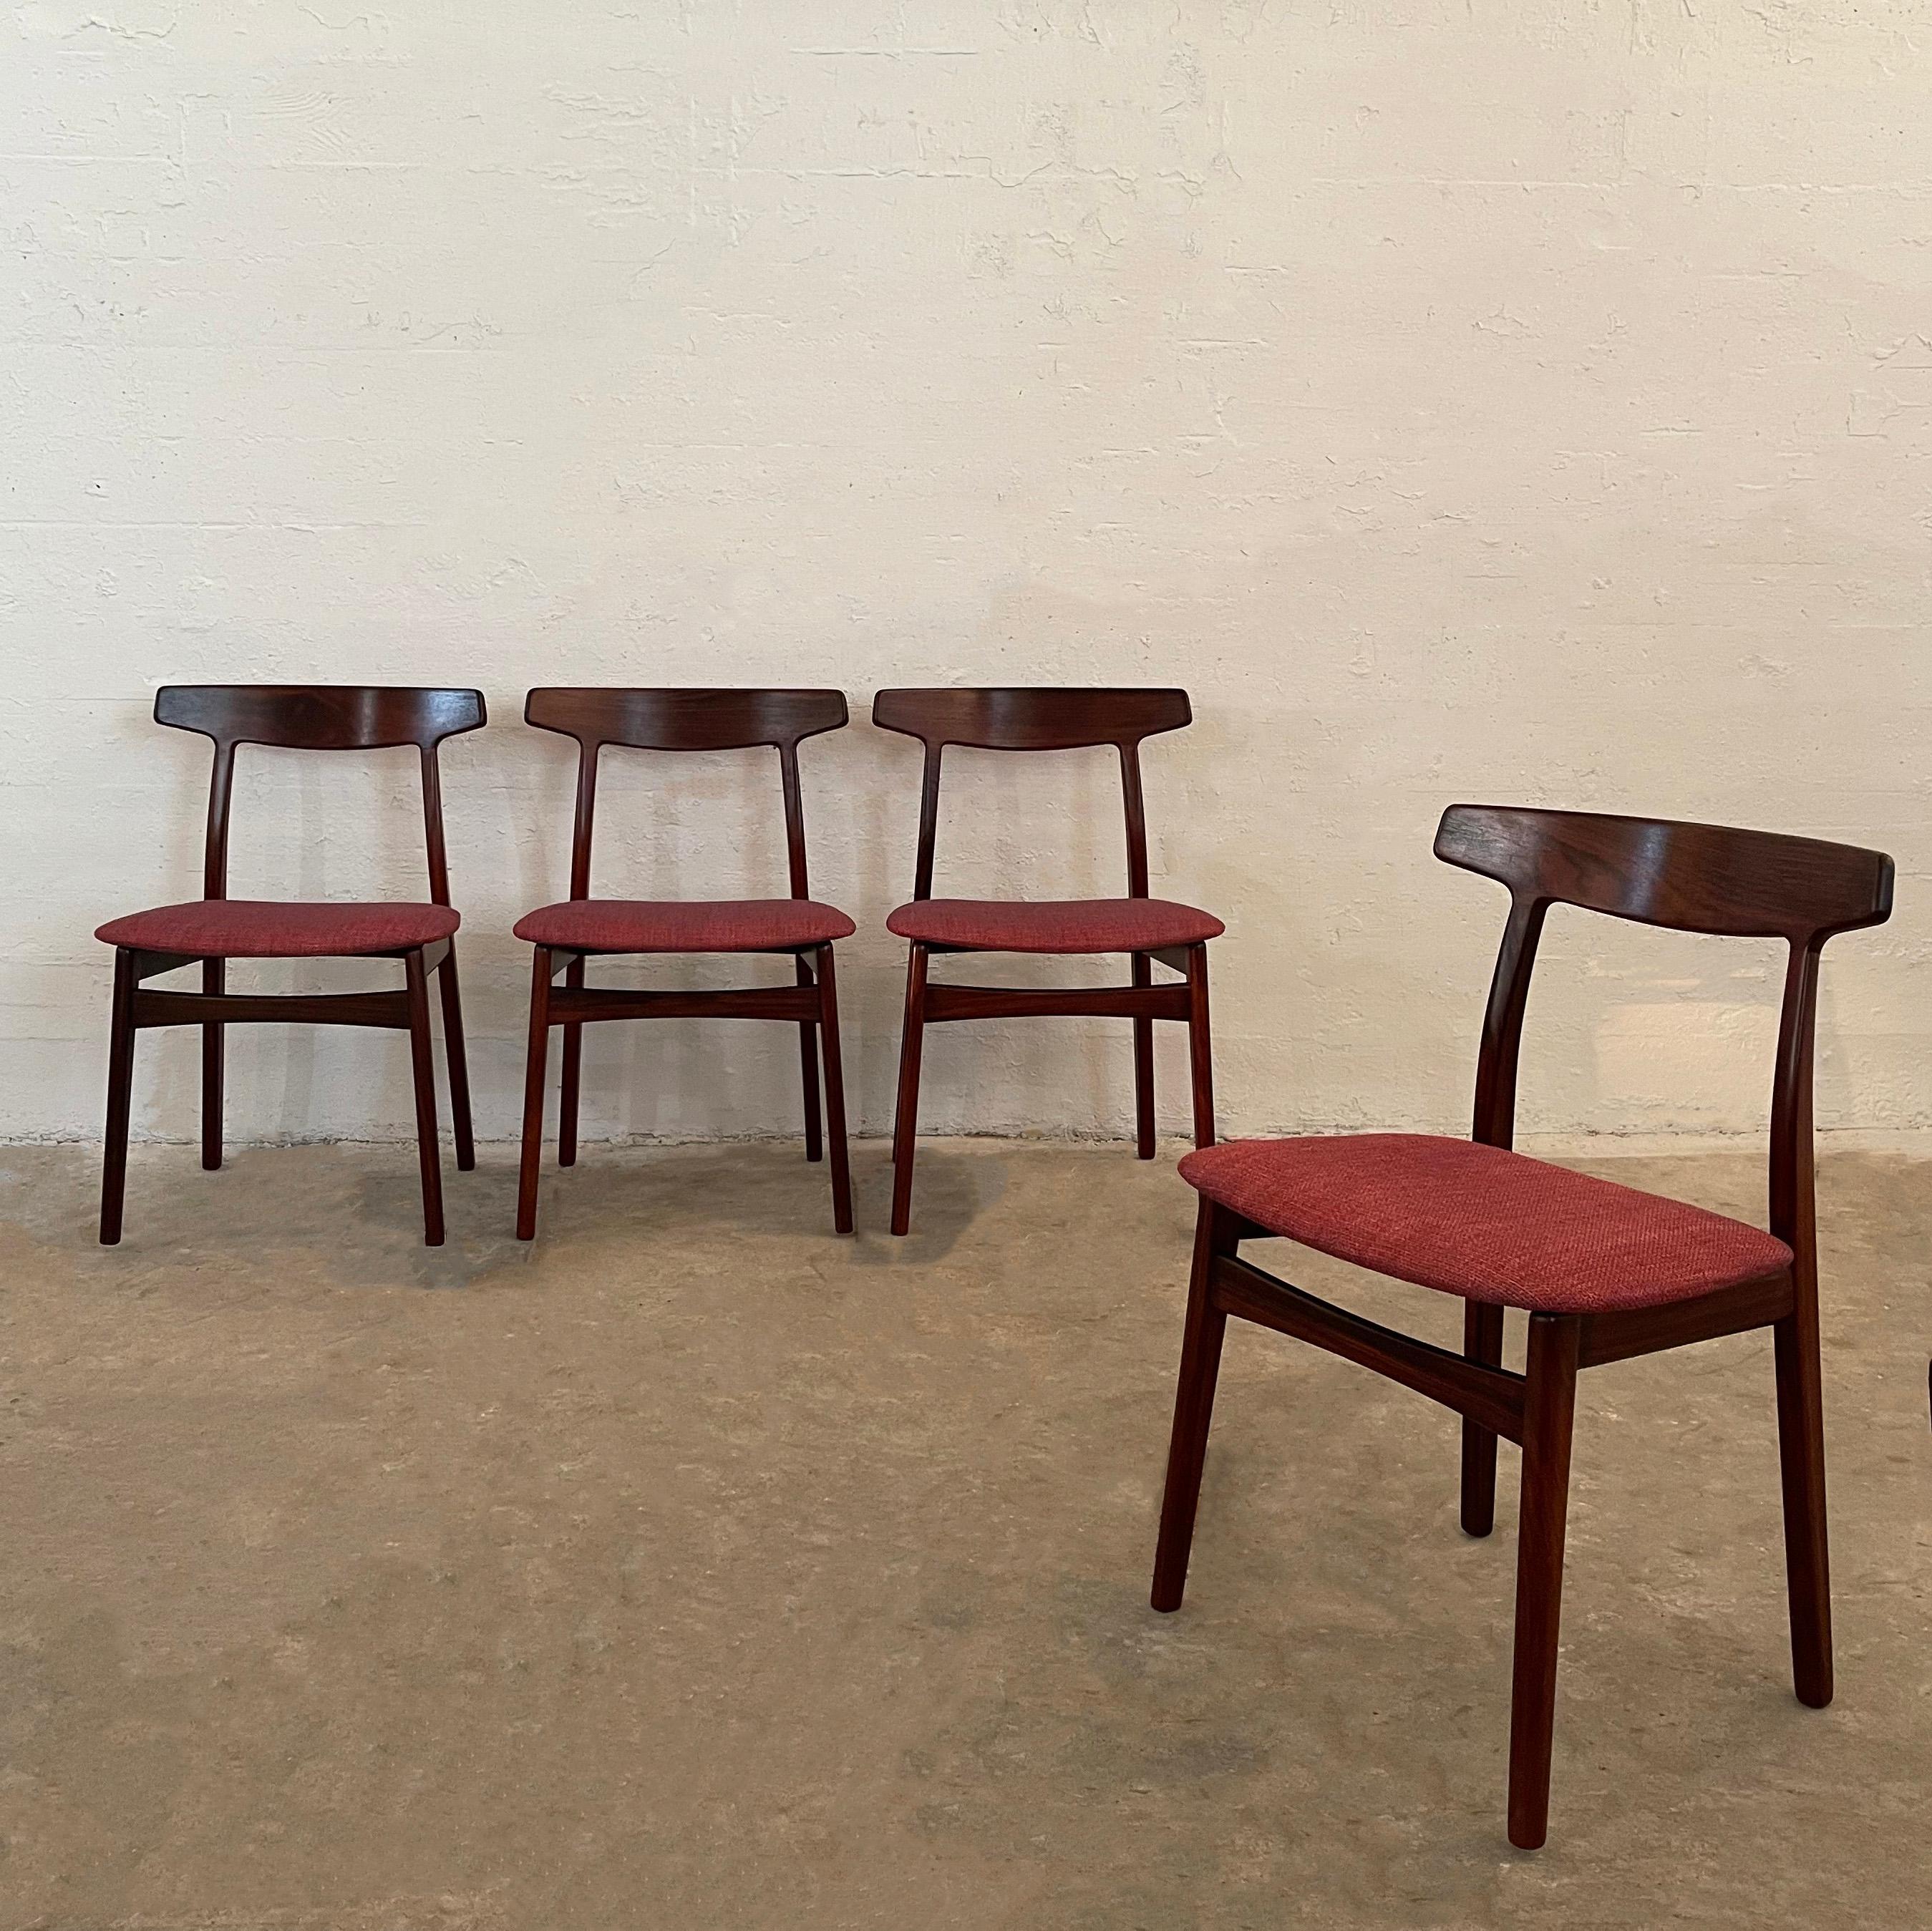 Set of four, Scandinavian modern, dining chairs designed by Danish architect Henning Kjaernulf for Bruno Hansen Møbelfabrik feature elegant rosewood frames with curved backrests and seats upholstered in raspberry tweed. The chairs are a beautiful